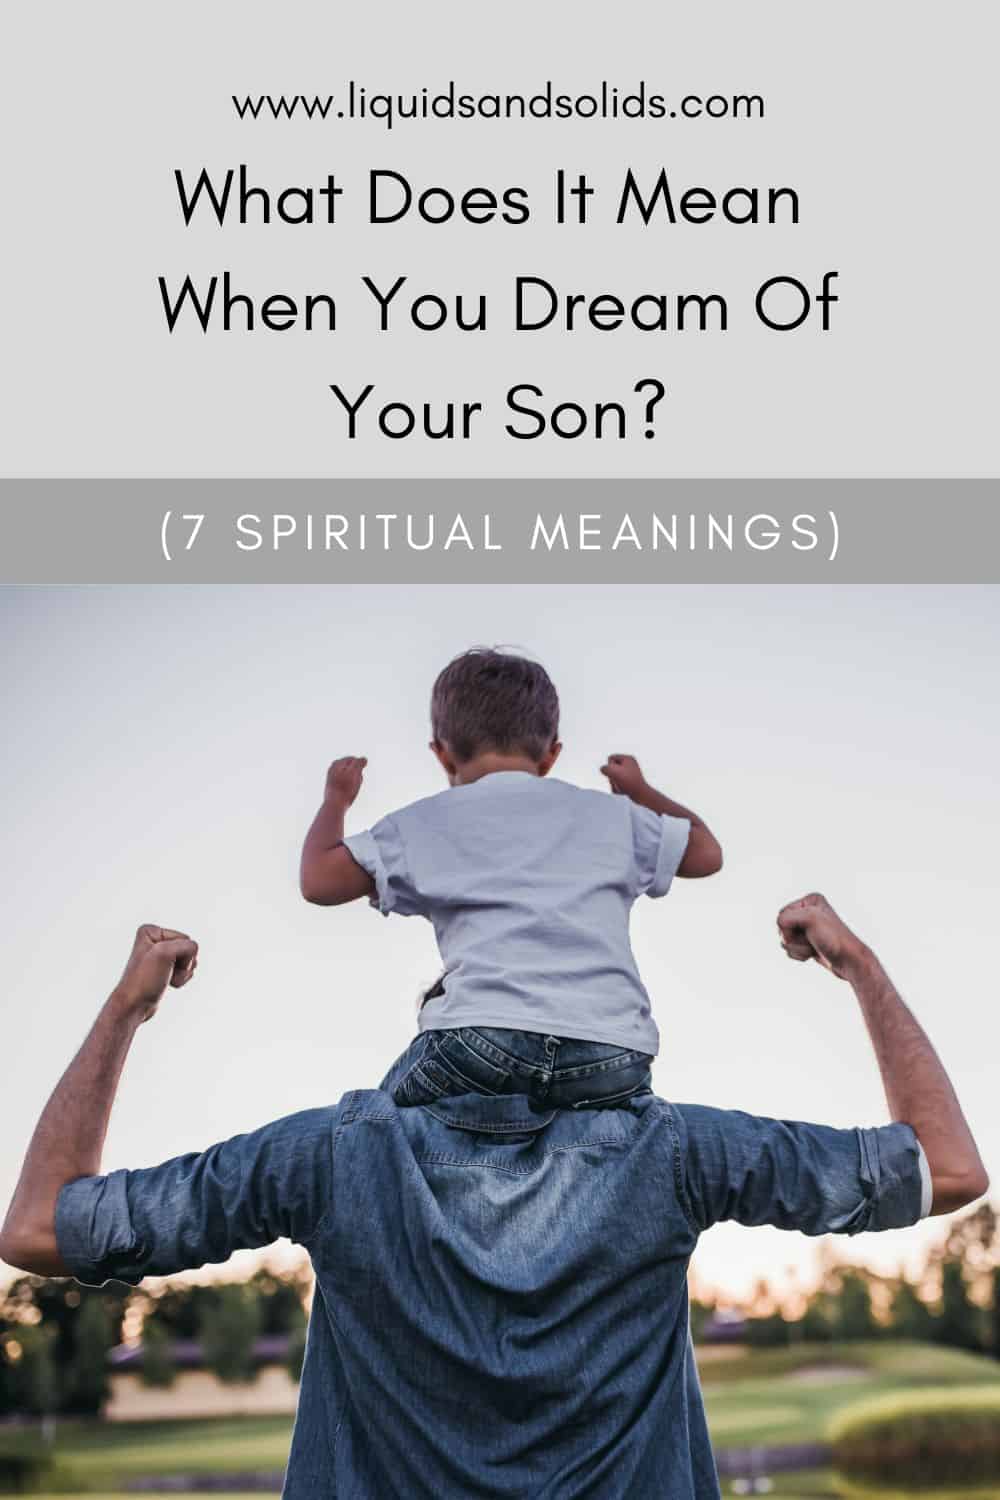 What Does It Mean When You Dream Of Your Son? (7 Spiritual Meanings)